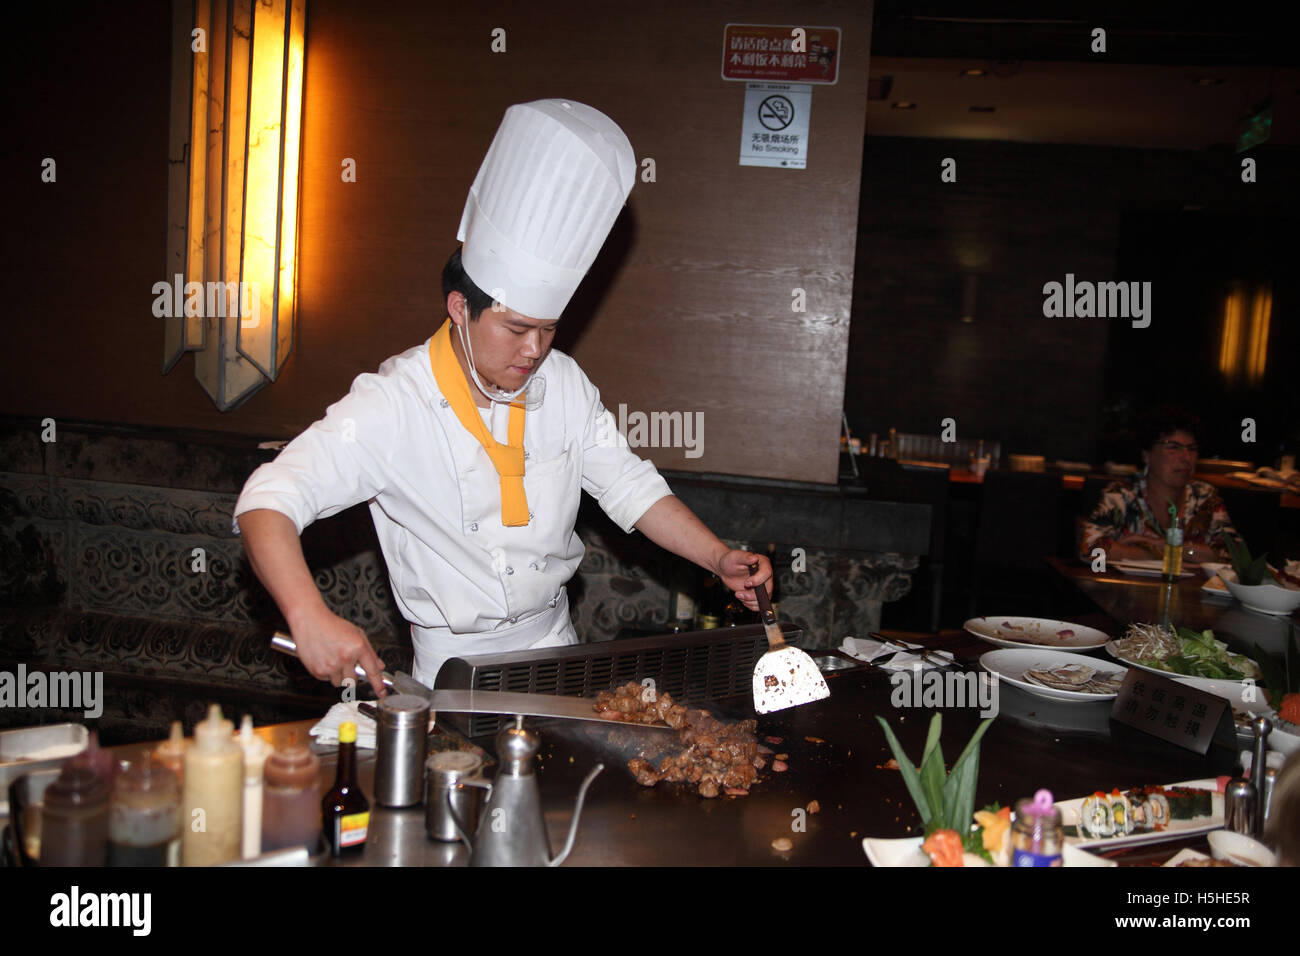 Chinese cook in a Chinese restaurant, wearing white uniform and a cap, stir fries pieces of meat in front of the diners. Beijing, China. Stock Photo